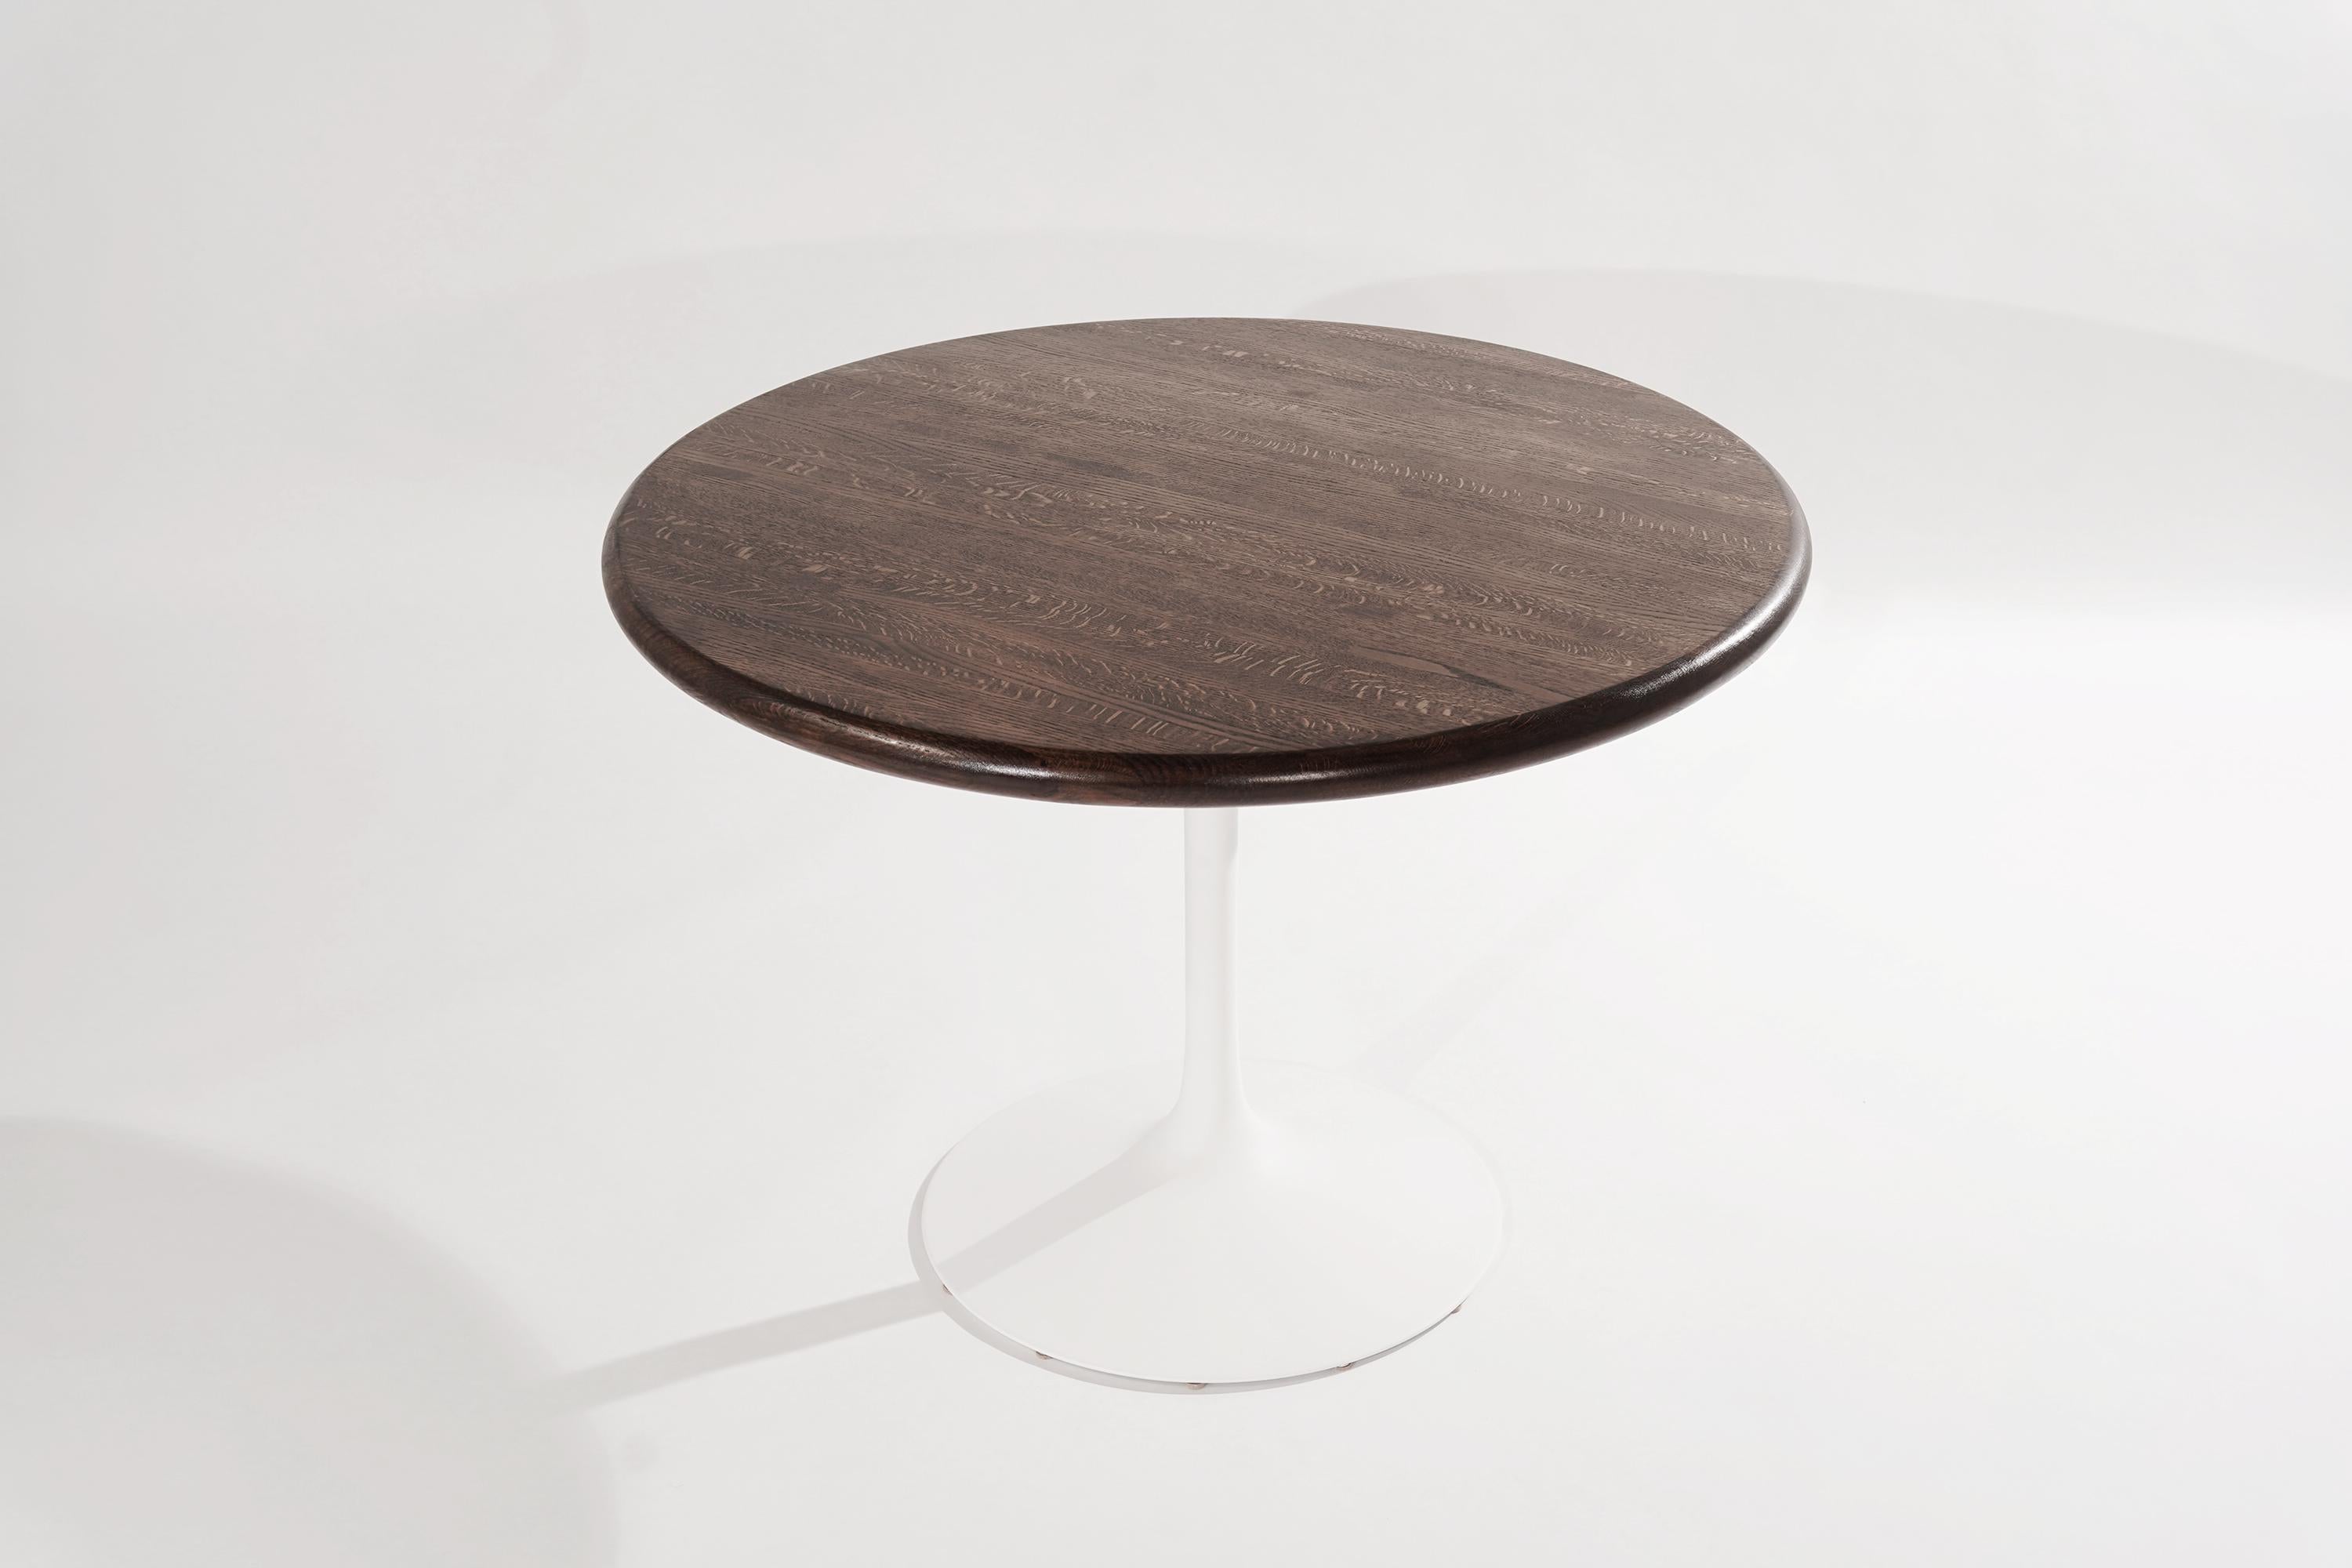 Tulip center or breakfast table in the style of Eero Saarinen for Florence Knoll, circa 1950-1959.
Completely restored, fiberglass pedestal re-painted in matte white, solid oak top refinished in medium brown.

Other designers from this period